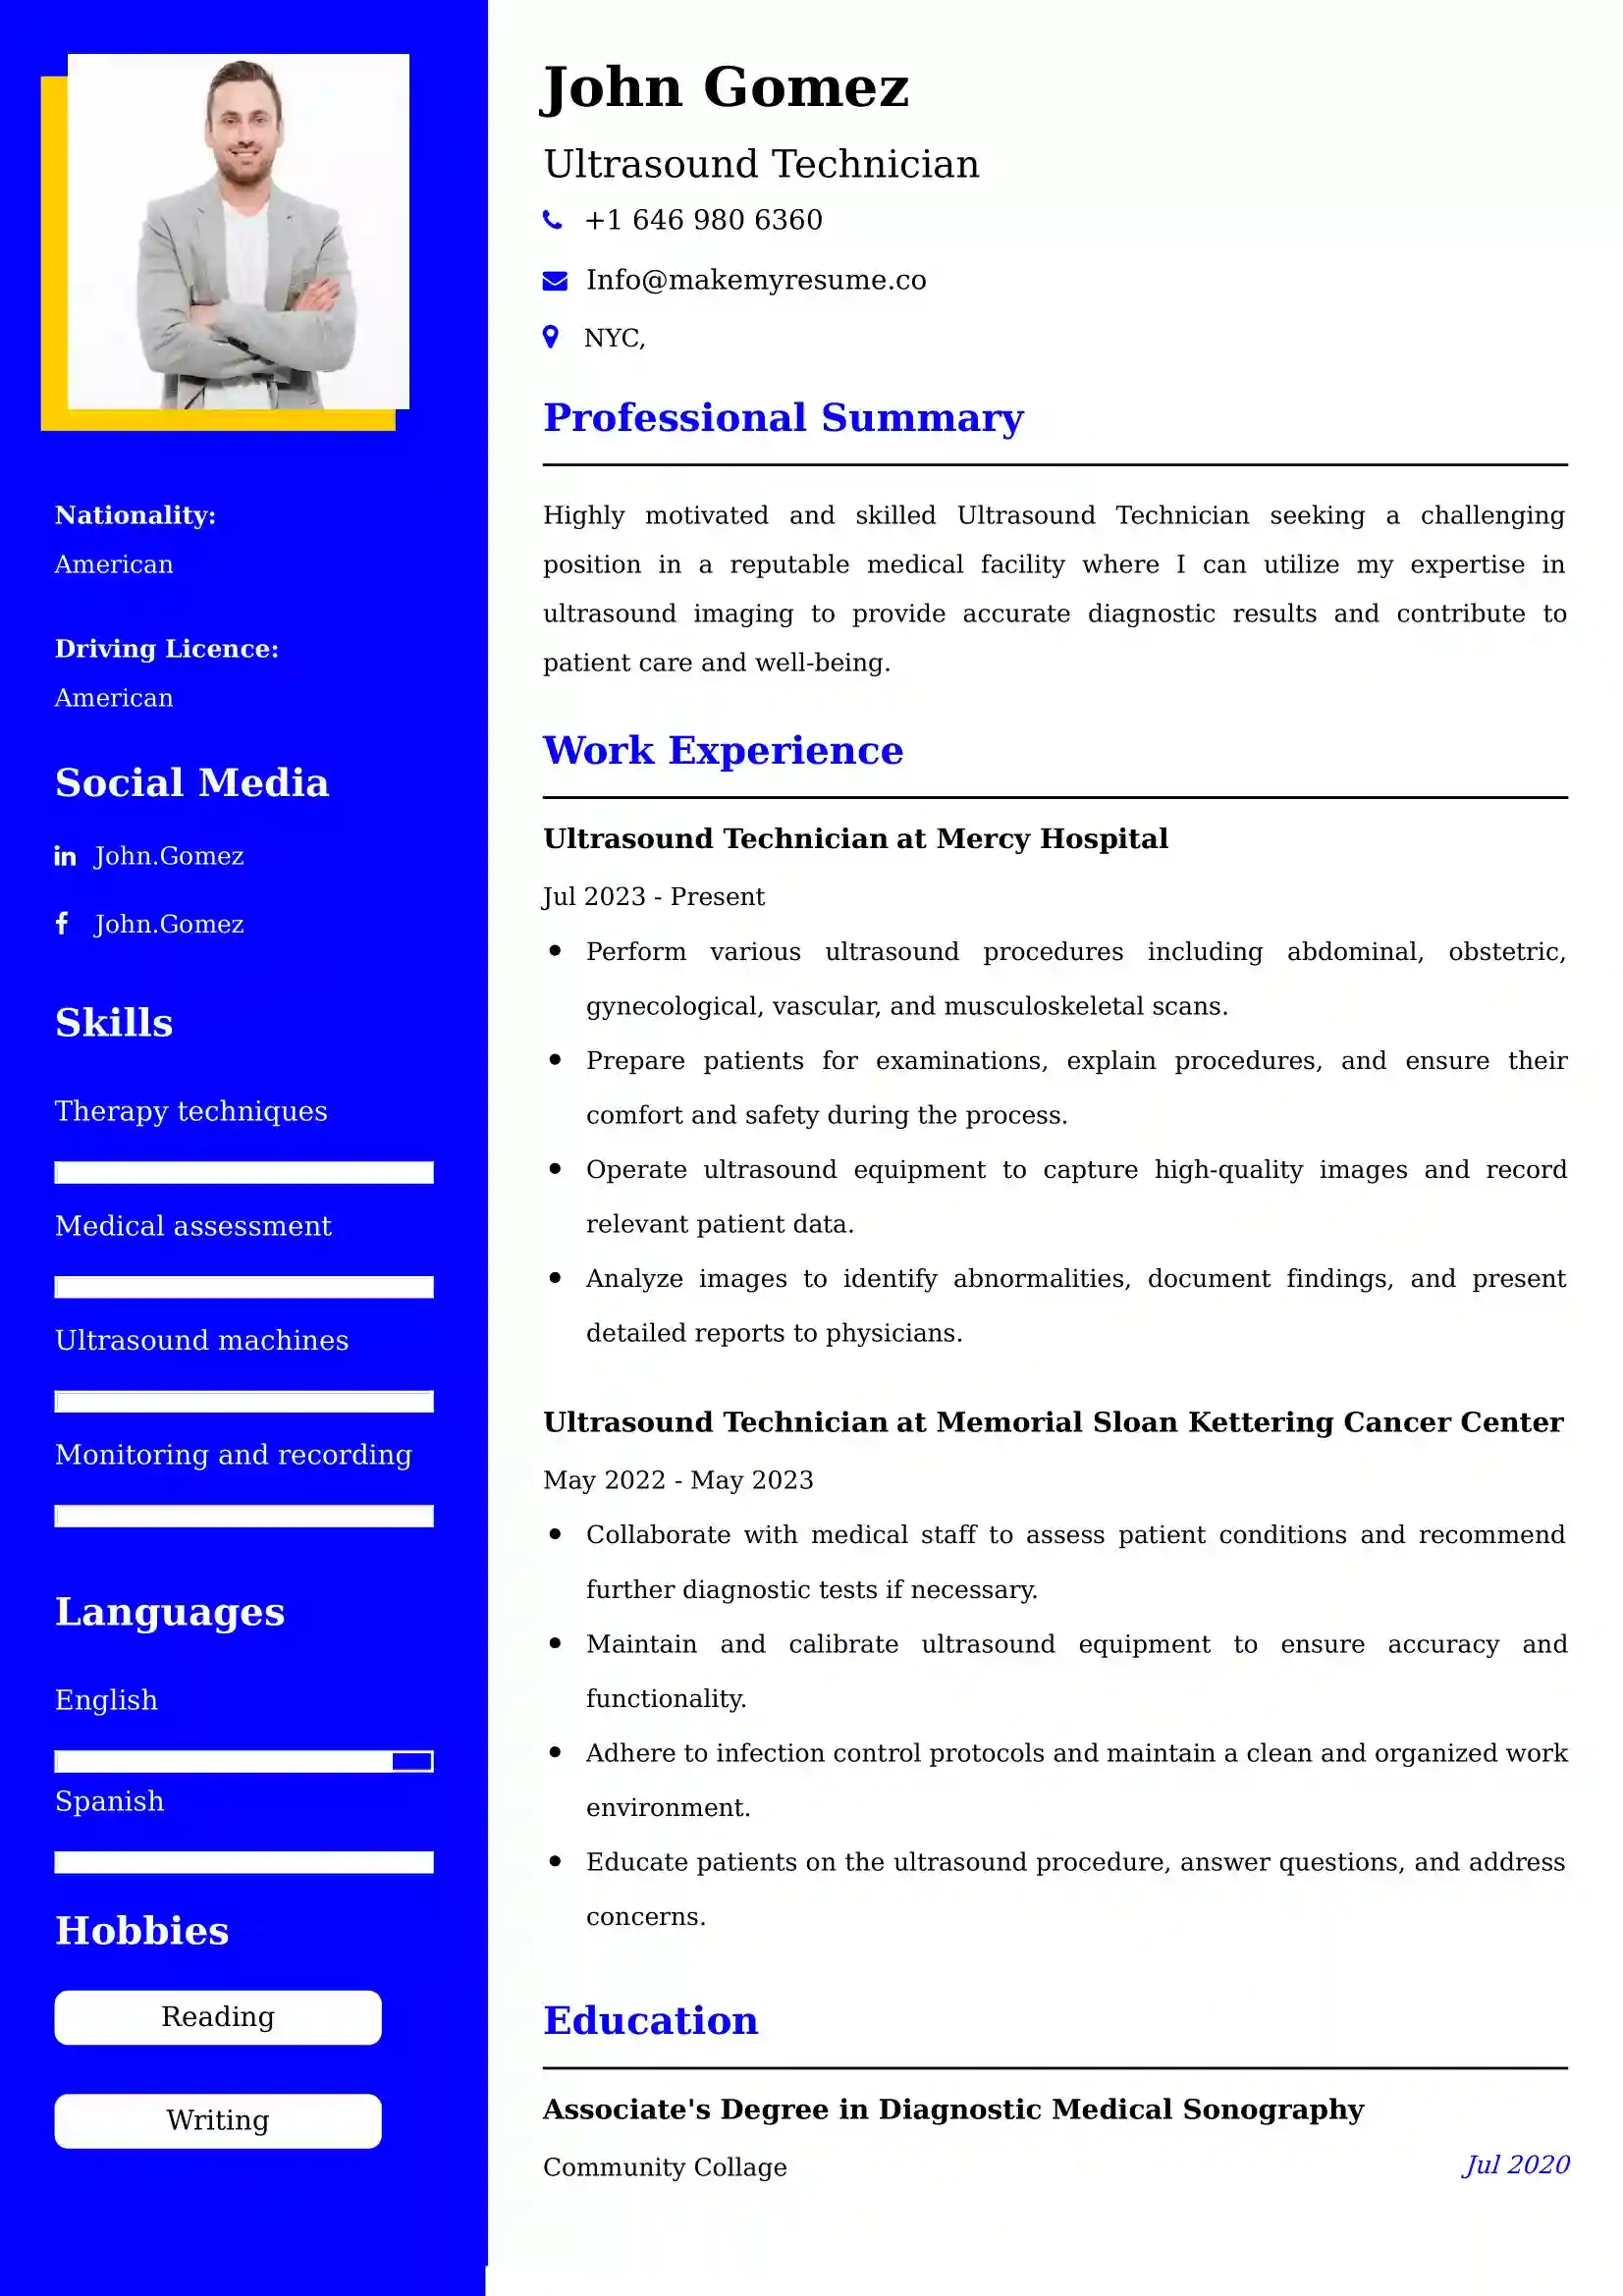 Ultrasound Technician Resume Examples for UK Jobs - Tips and Guide